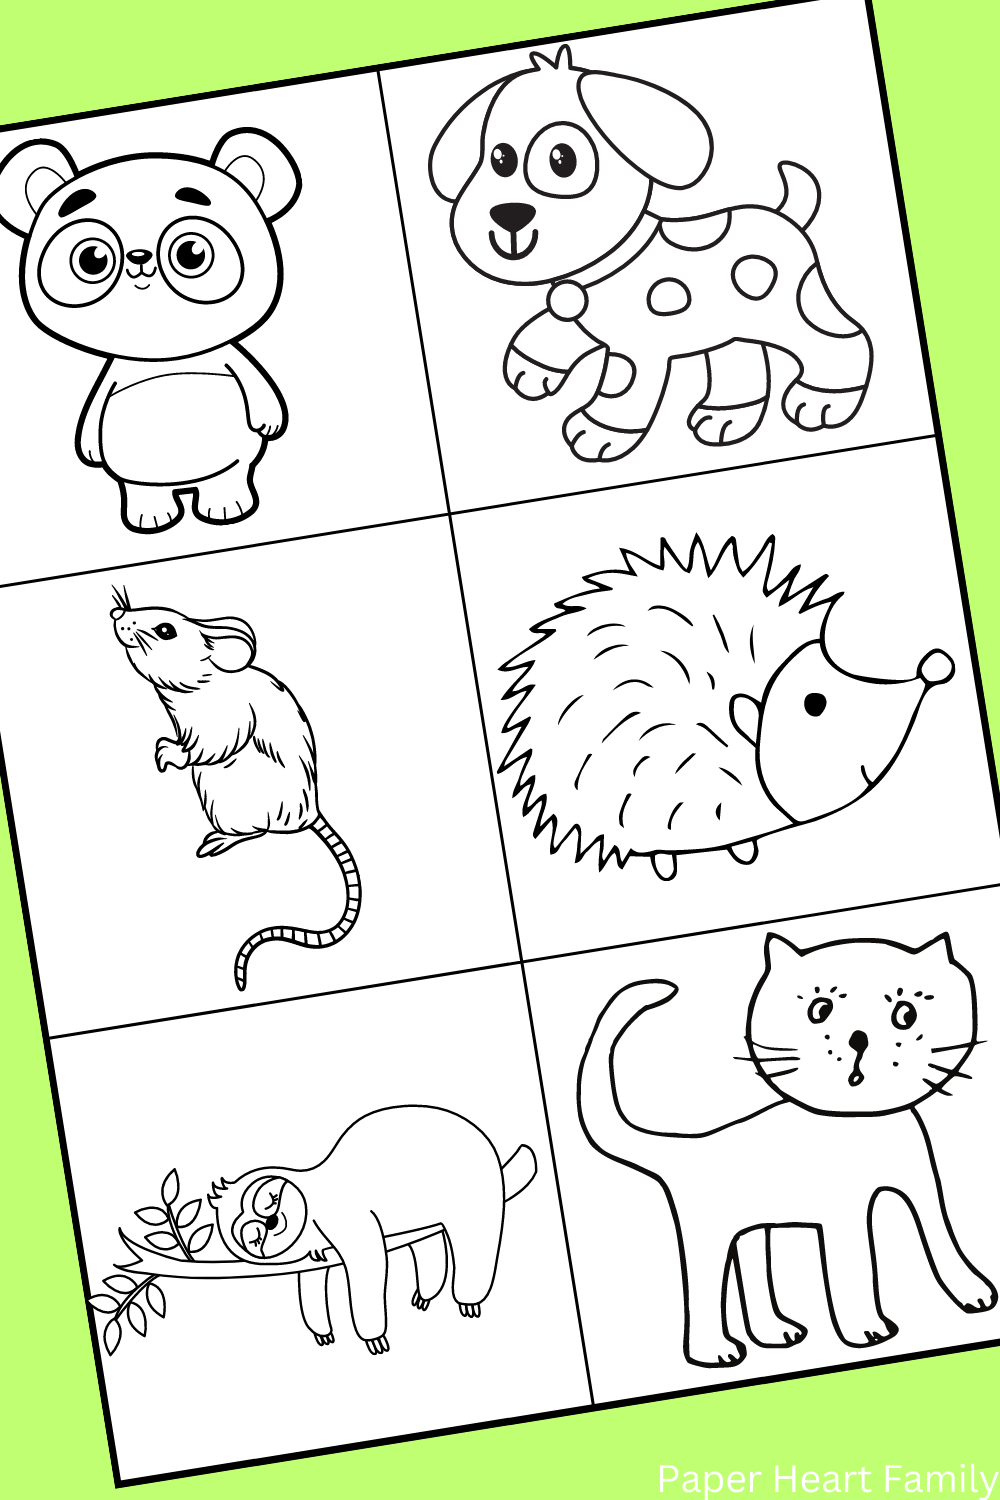 Bini Drawing games for kids - Apps on Google Play-saigonsouth.com.vn